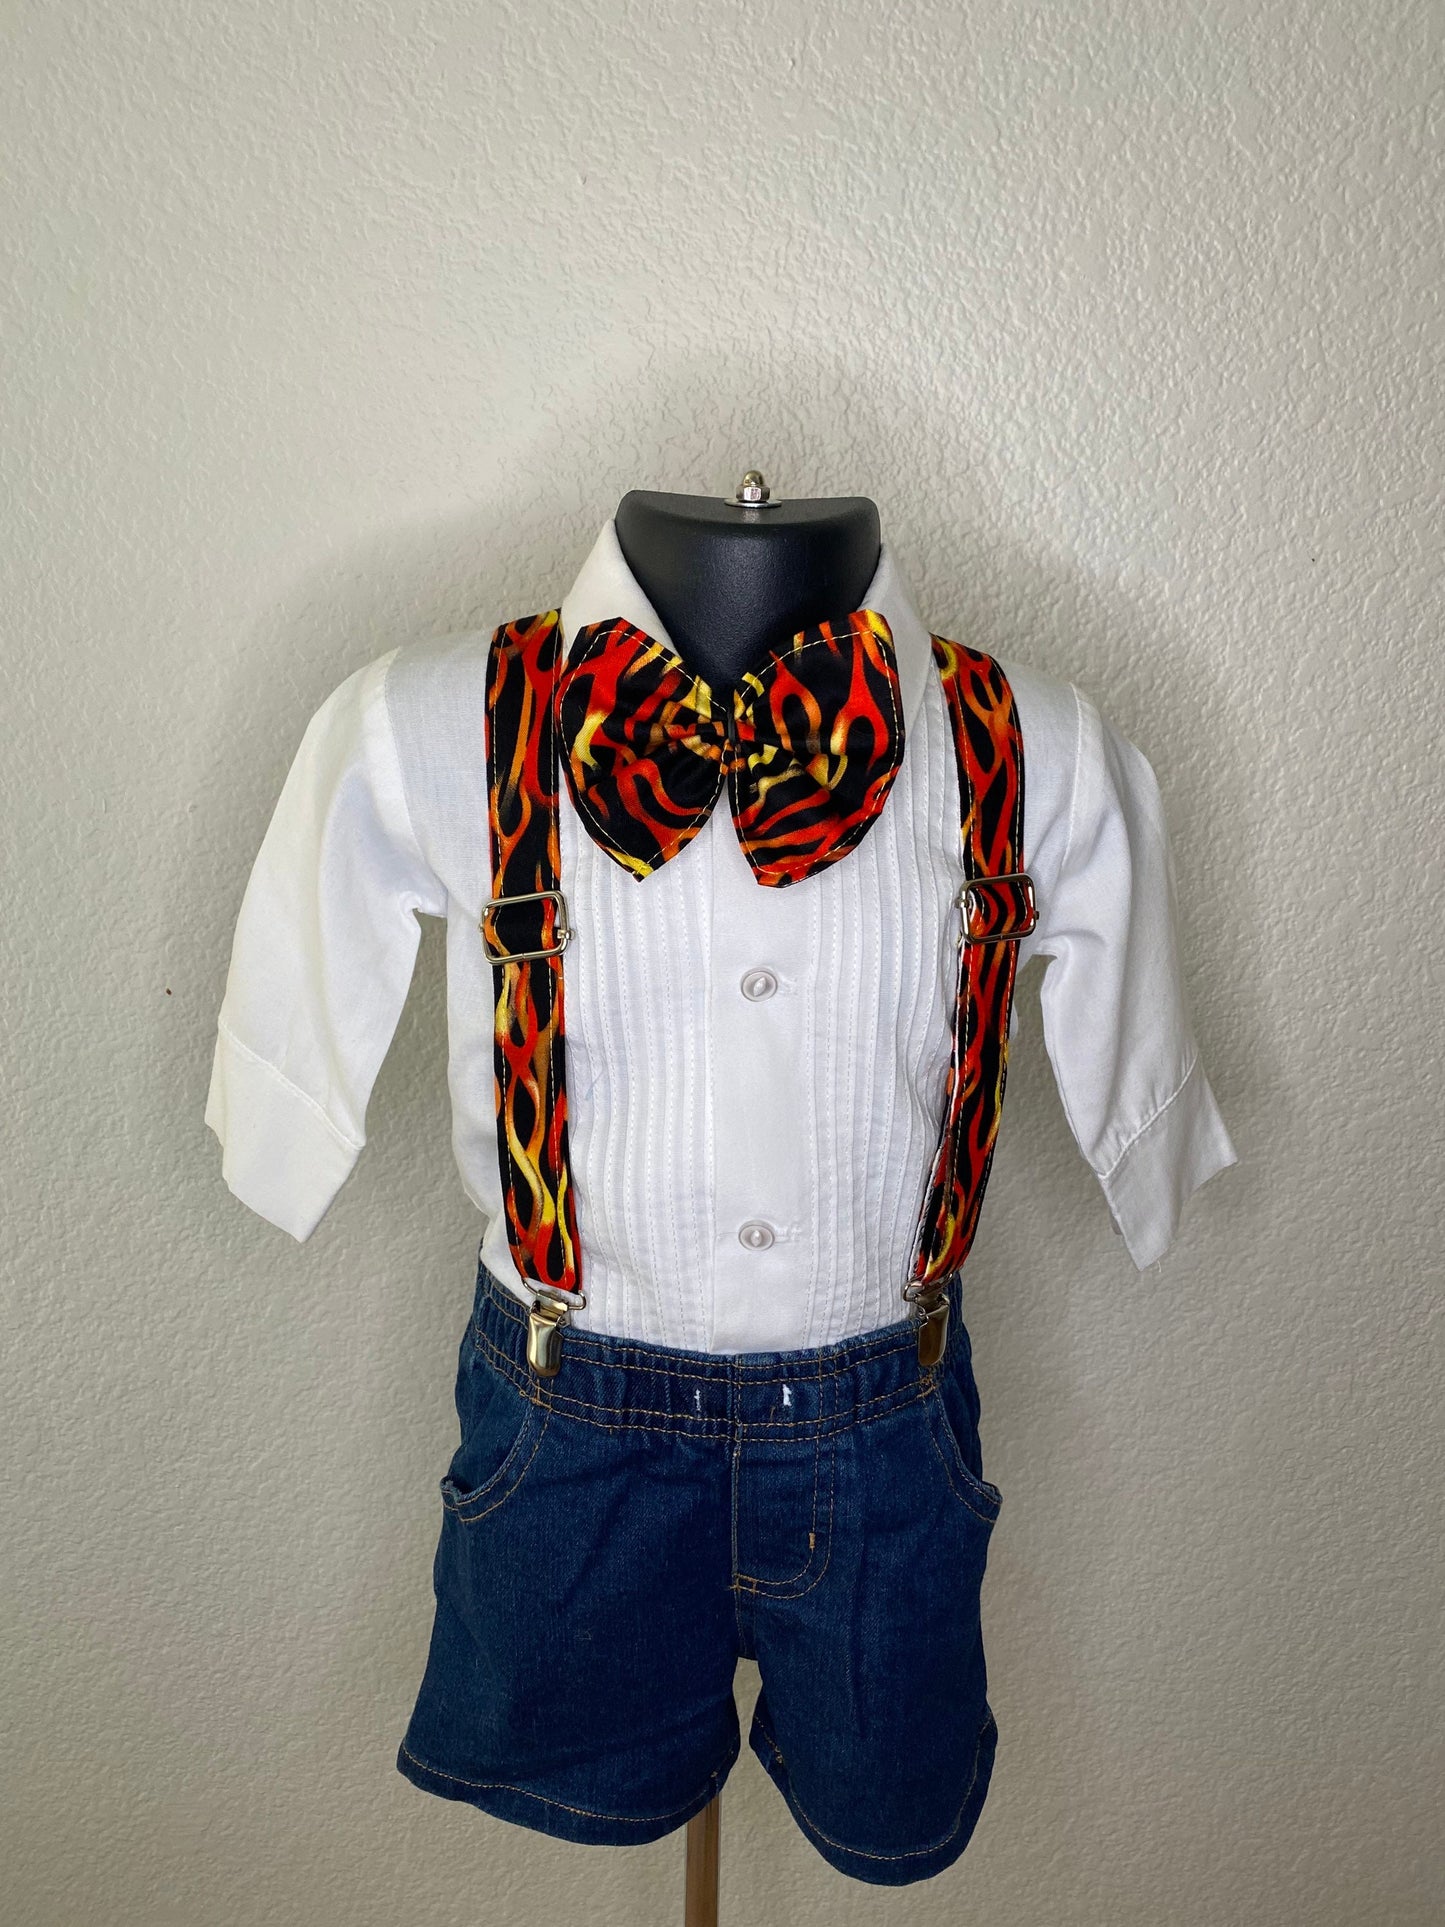 Flames suspenders and bow tie / Infant, Toddler, Child, Teen, Adult, Big & Tall